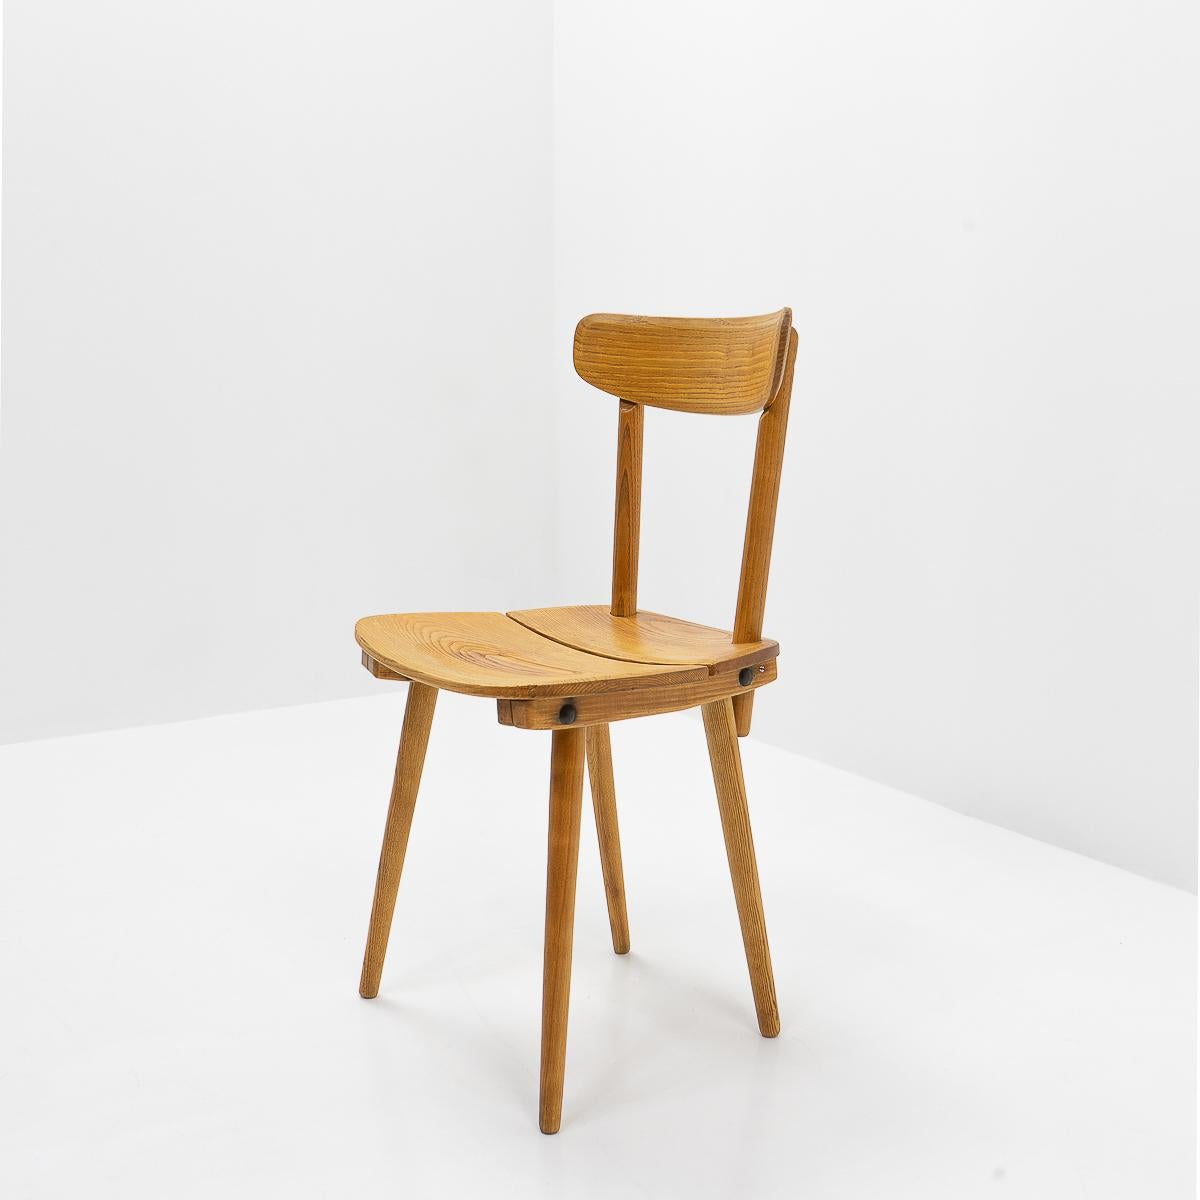 Pine Jakob Müller Side Chair for Wohnhilfe, Switzerland, 1950s For Sale